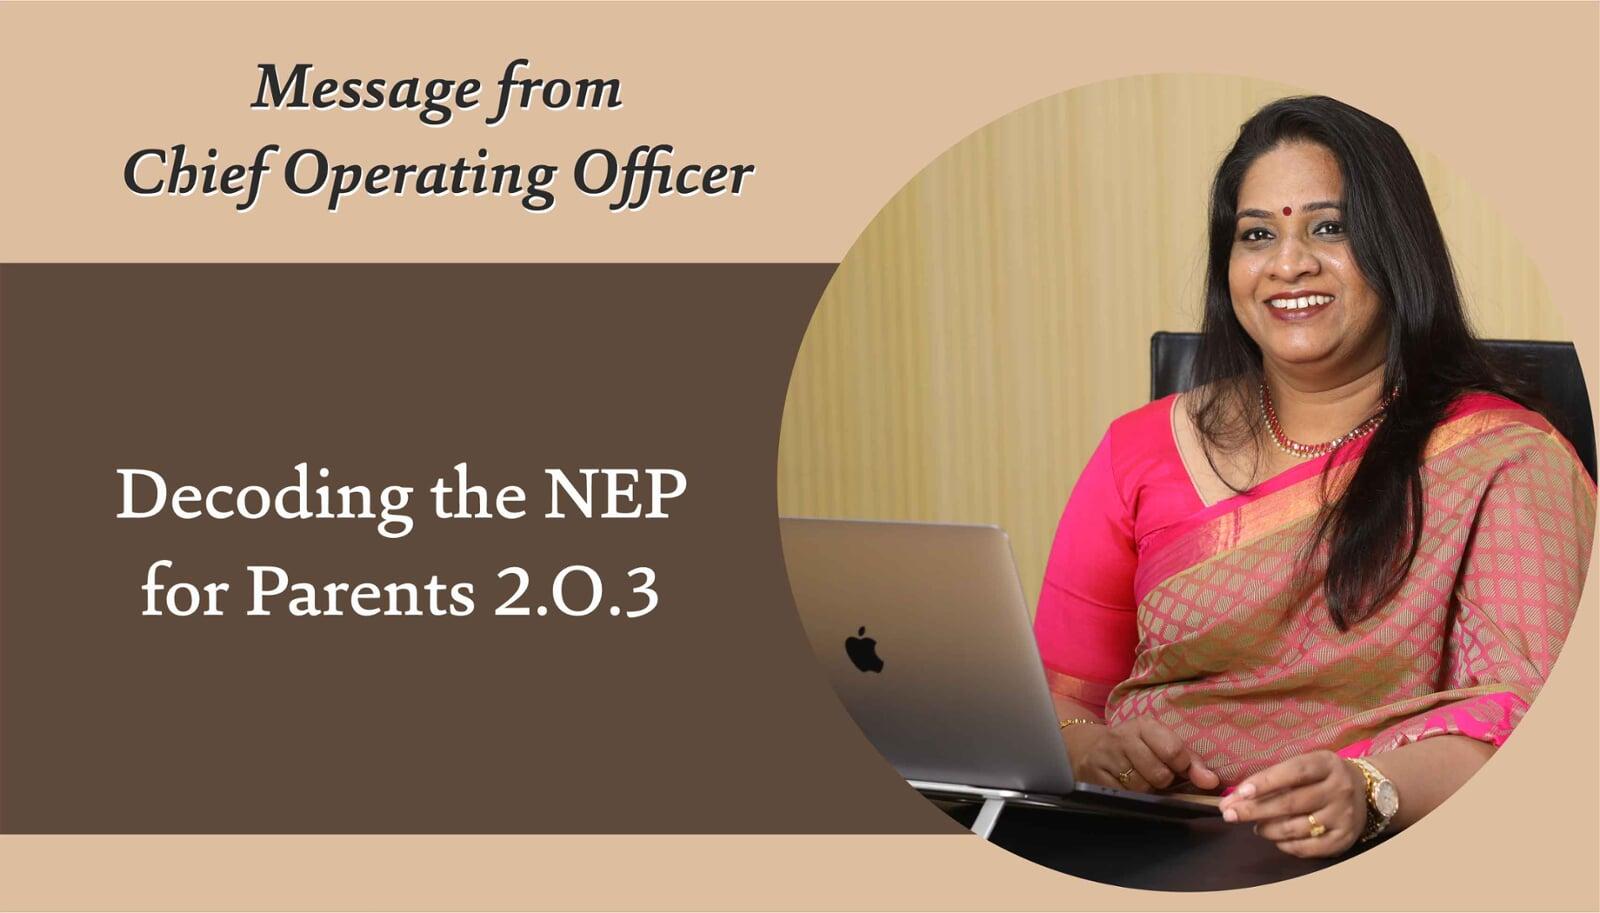 Decoding the NEP for Parents 2.0.3